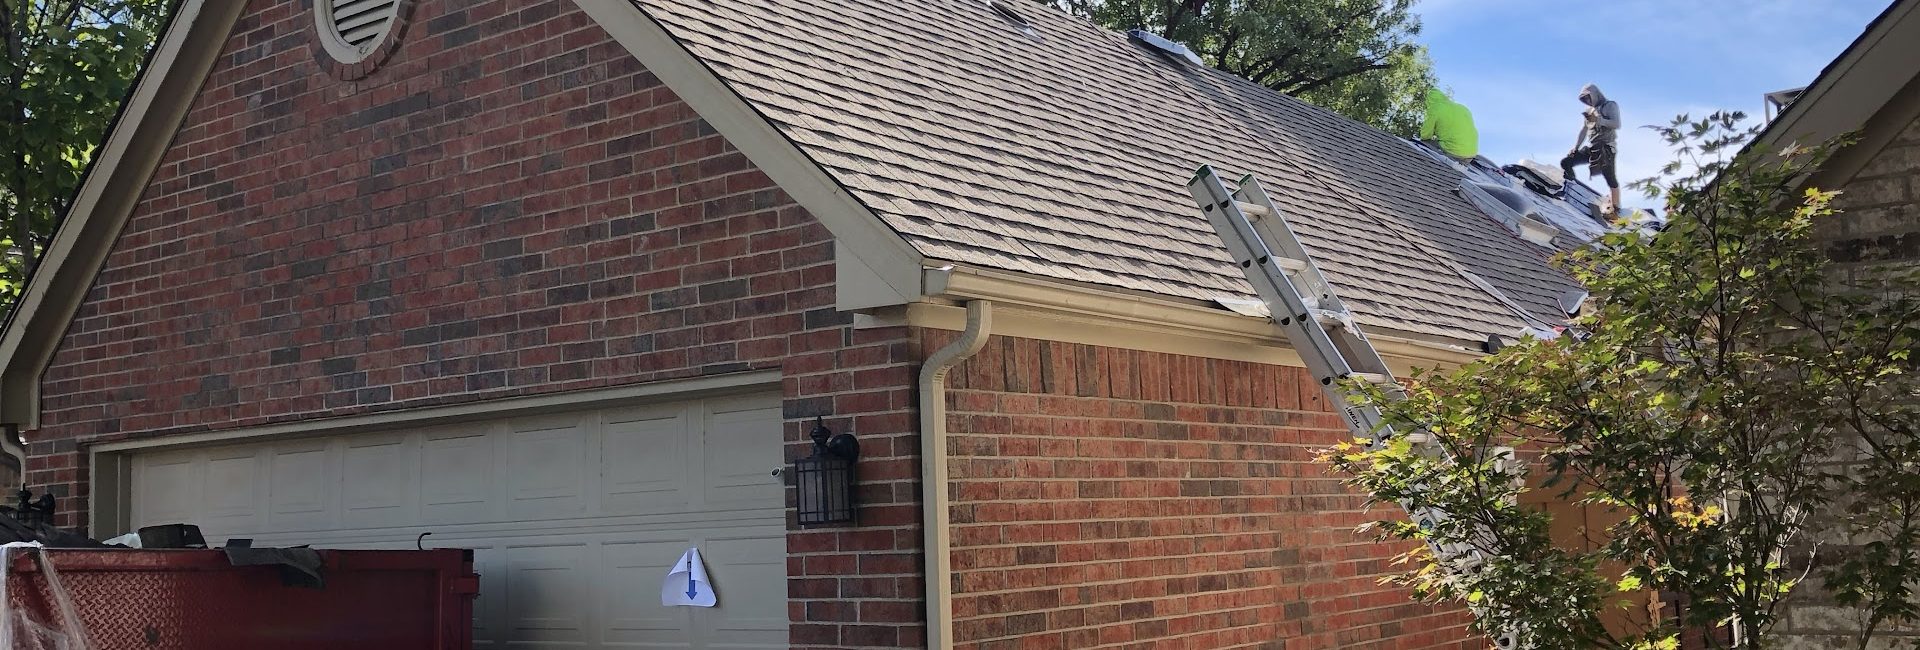 North Texas Roofing 3